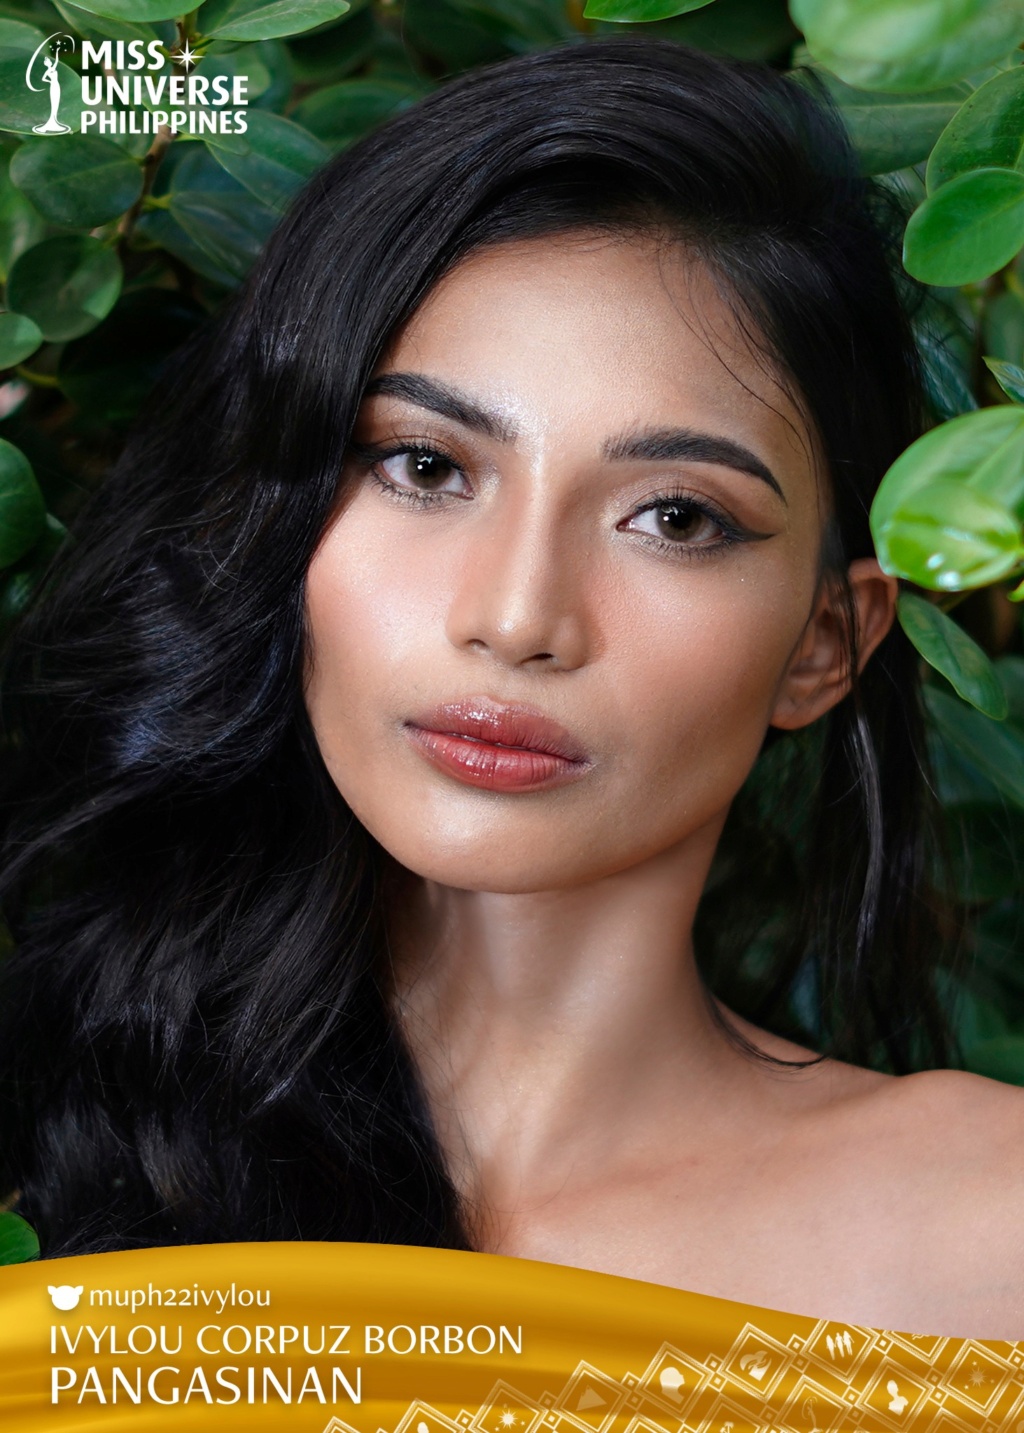 ROAD TO MISS UNIVERSE PHILIPPINES 2022 is is Miss Pasay, Celeste Cortesi - Page 5 27560720